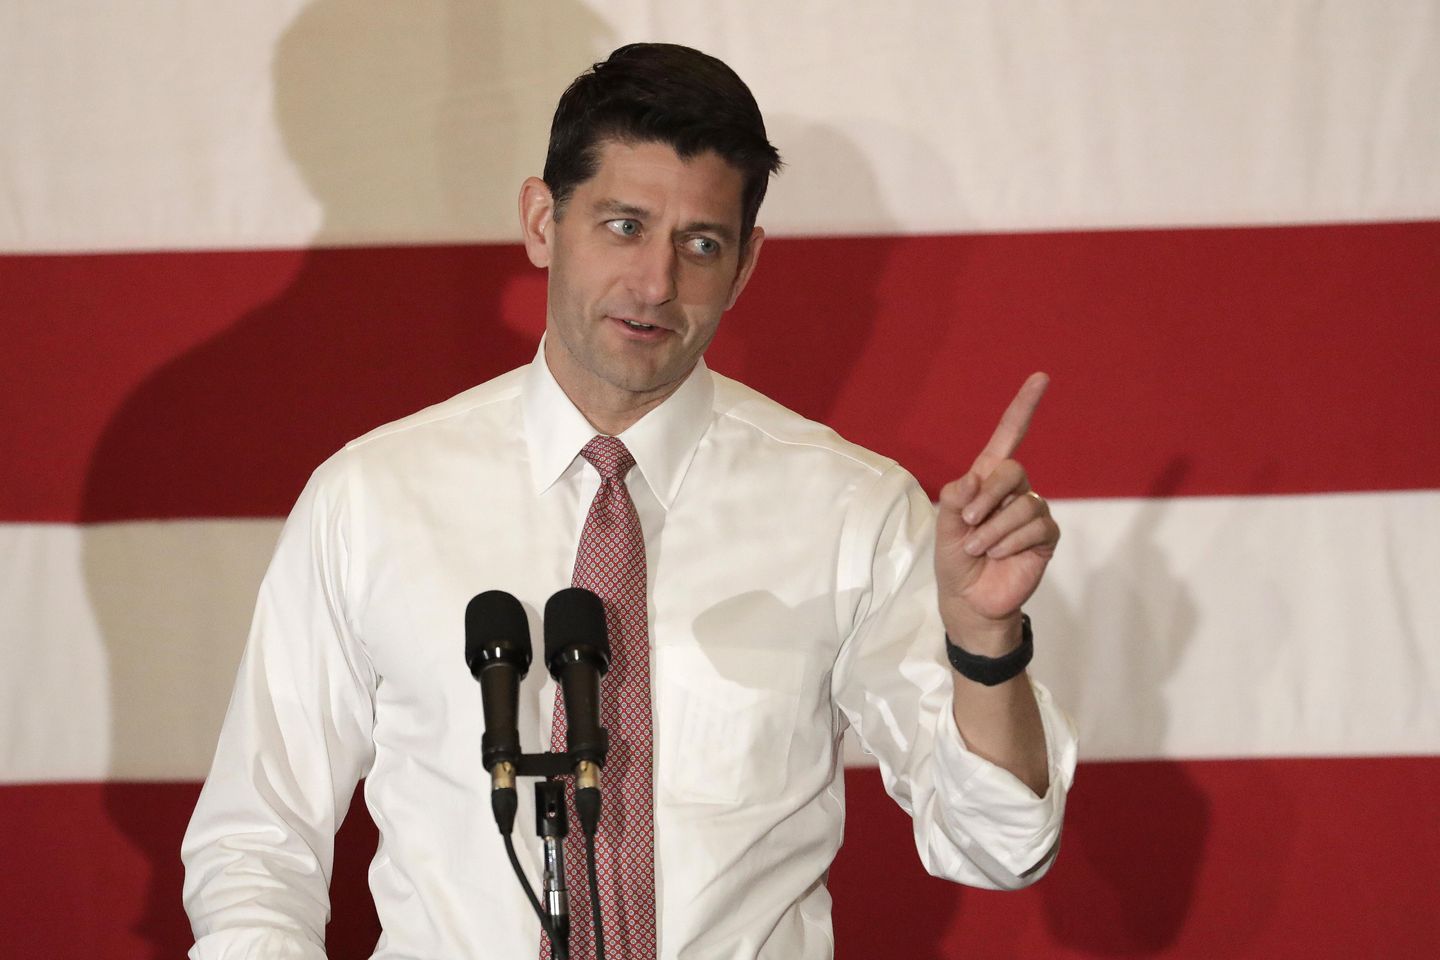 Paul Ryan was horrified, left sobbing as Jan. 6 attack unfolded at U.S. Capitol: New book